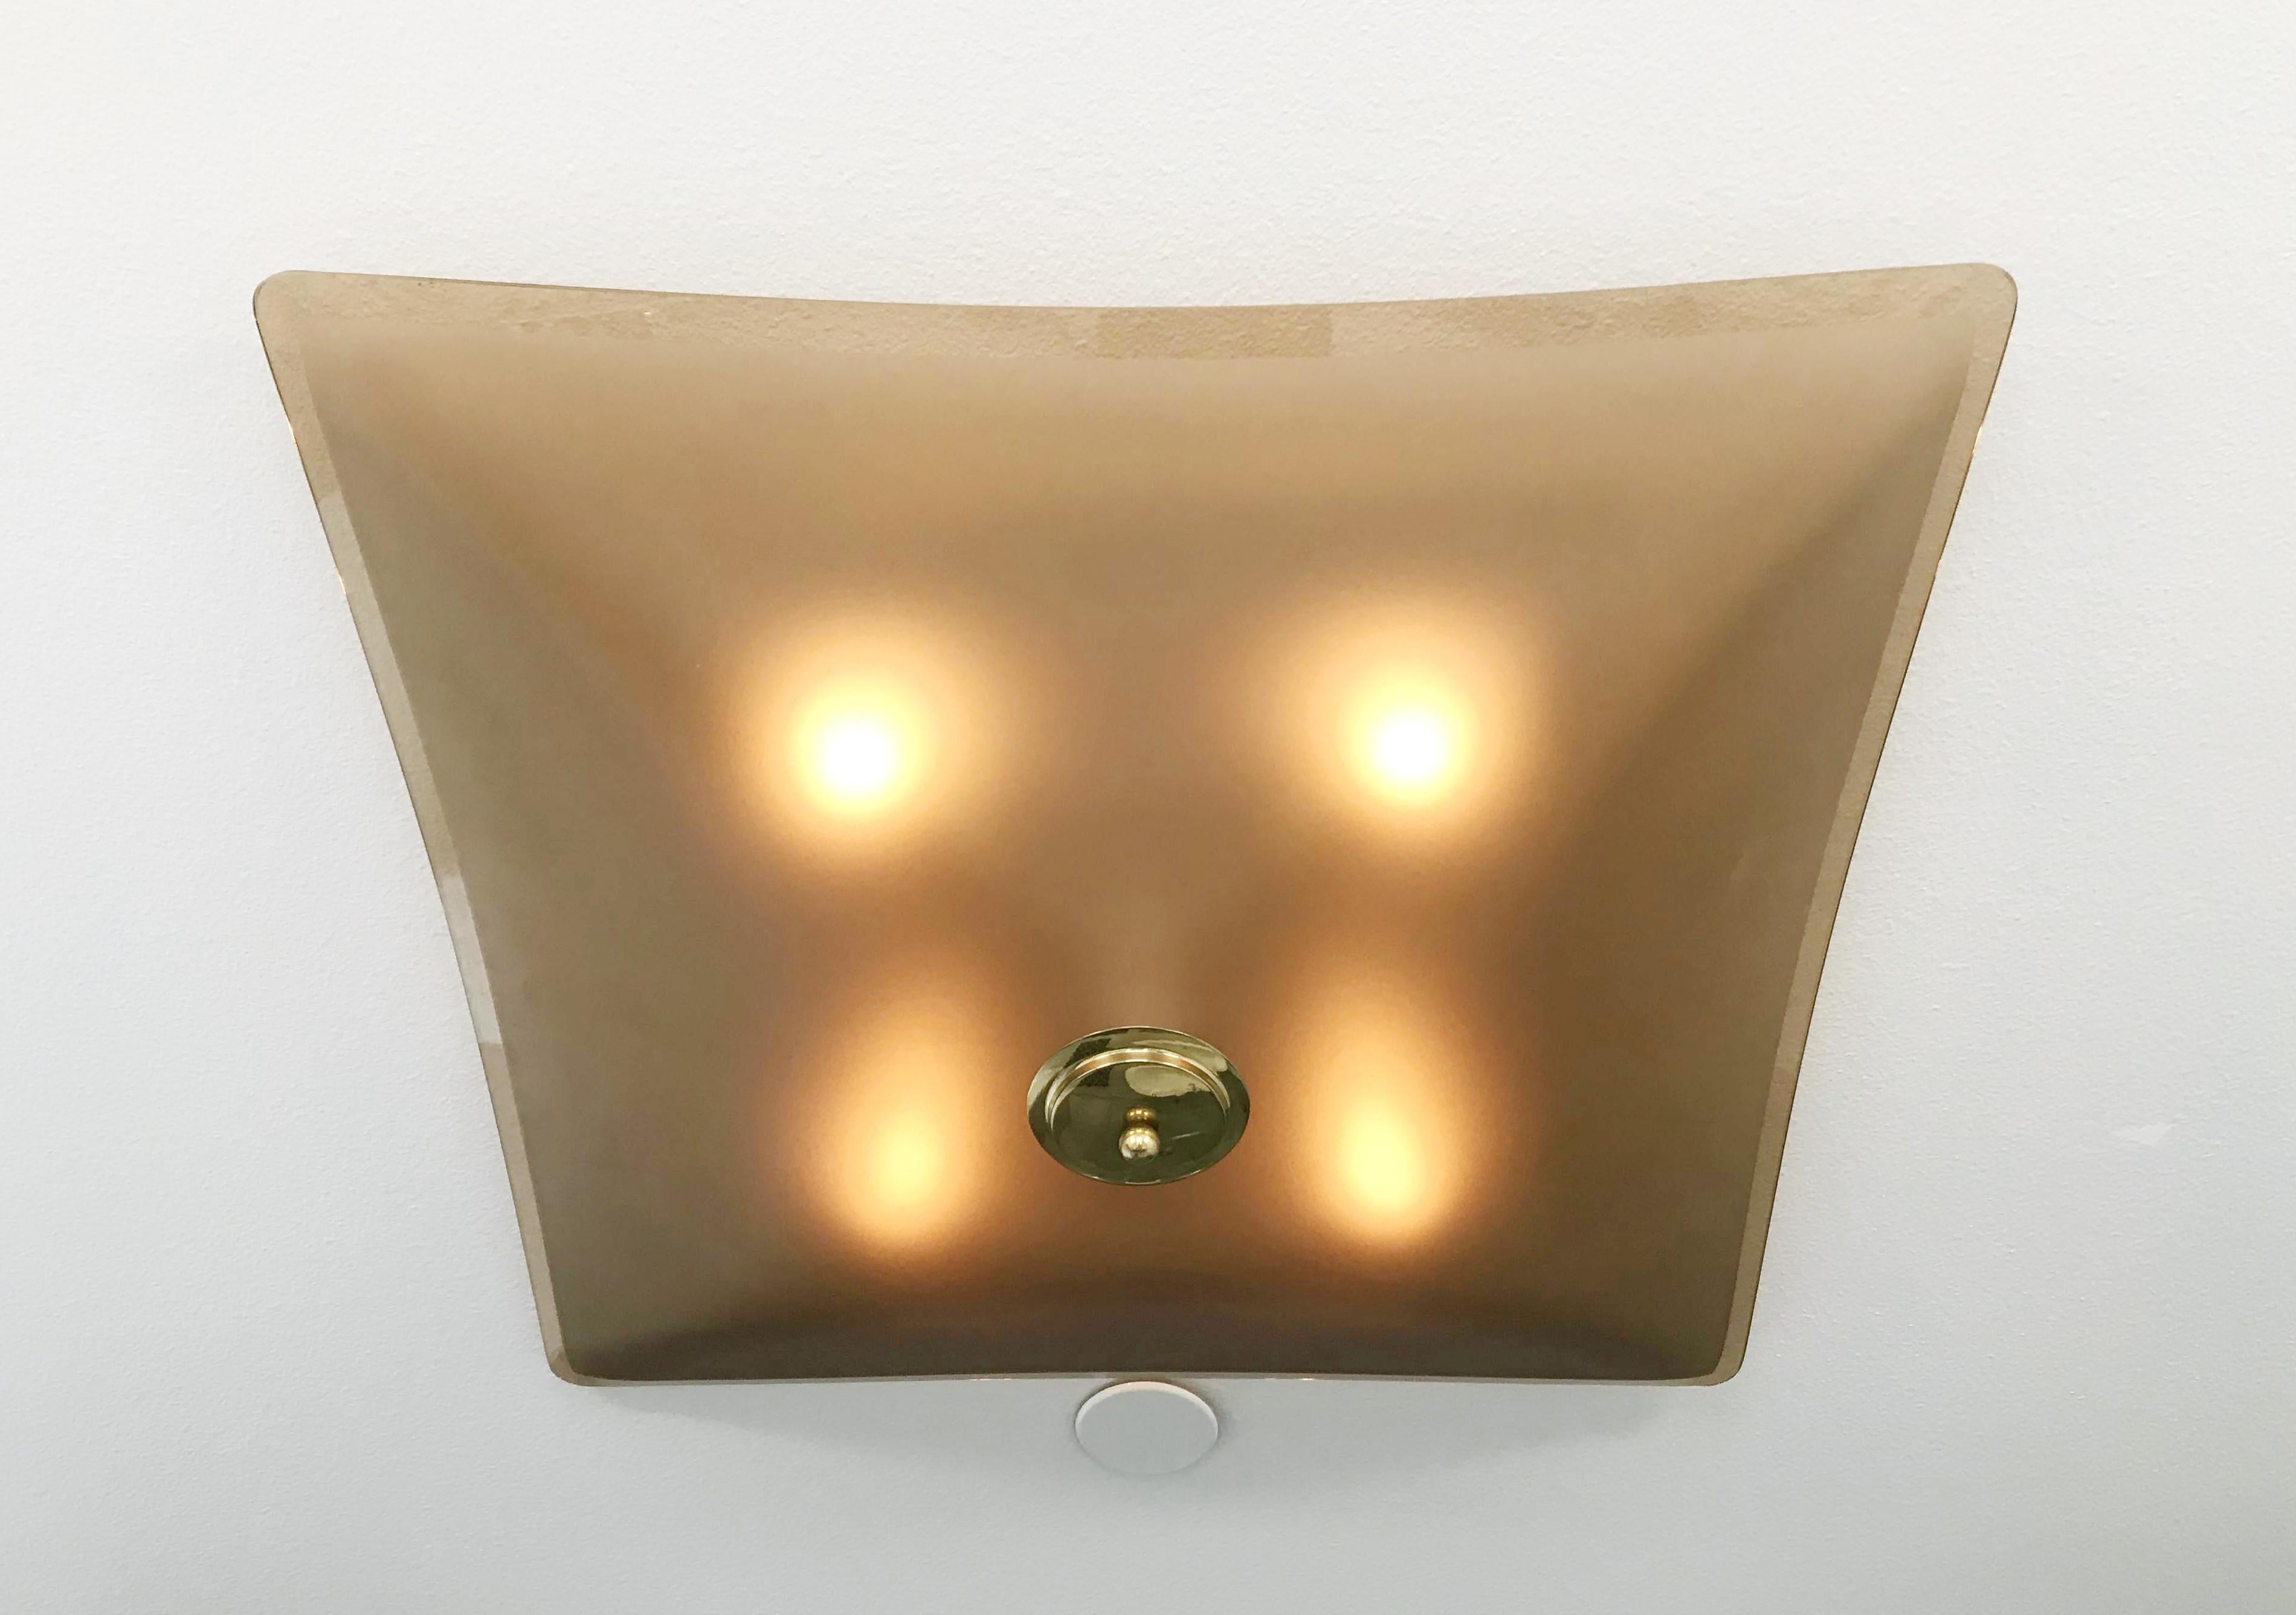 20th Century Beveled Glass Flush Mount or Wall Sconce - 2 available For Sale